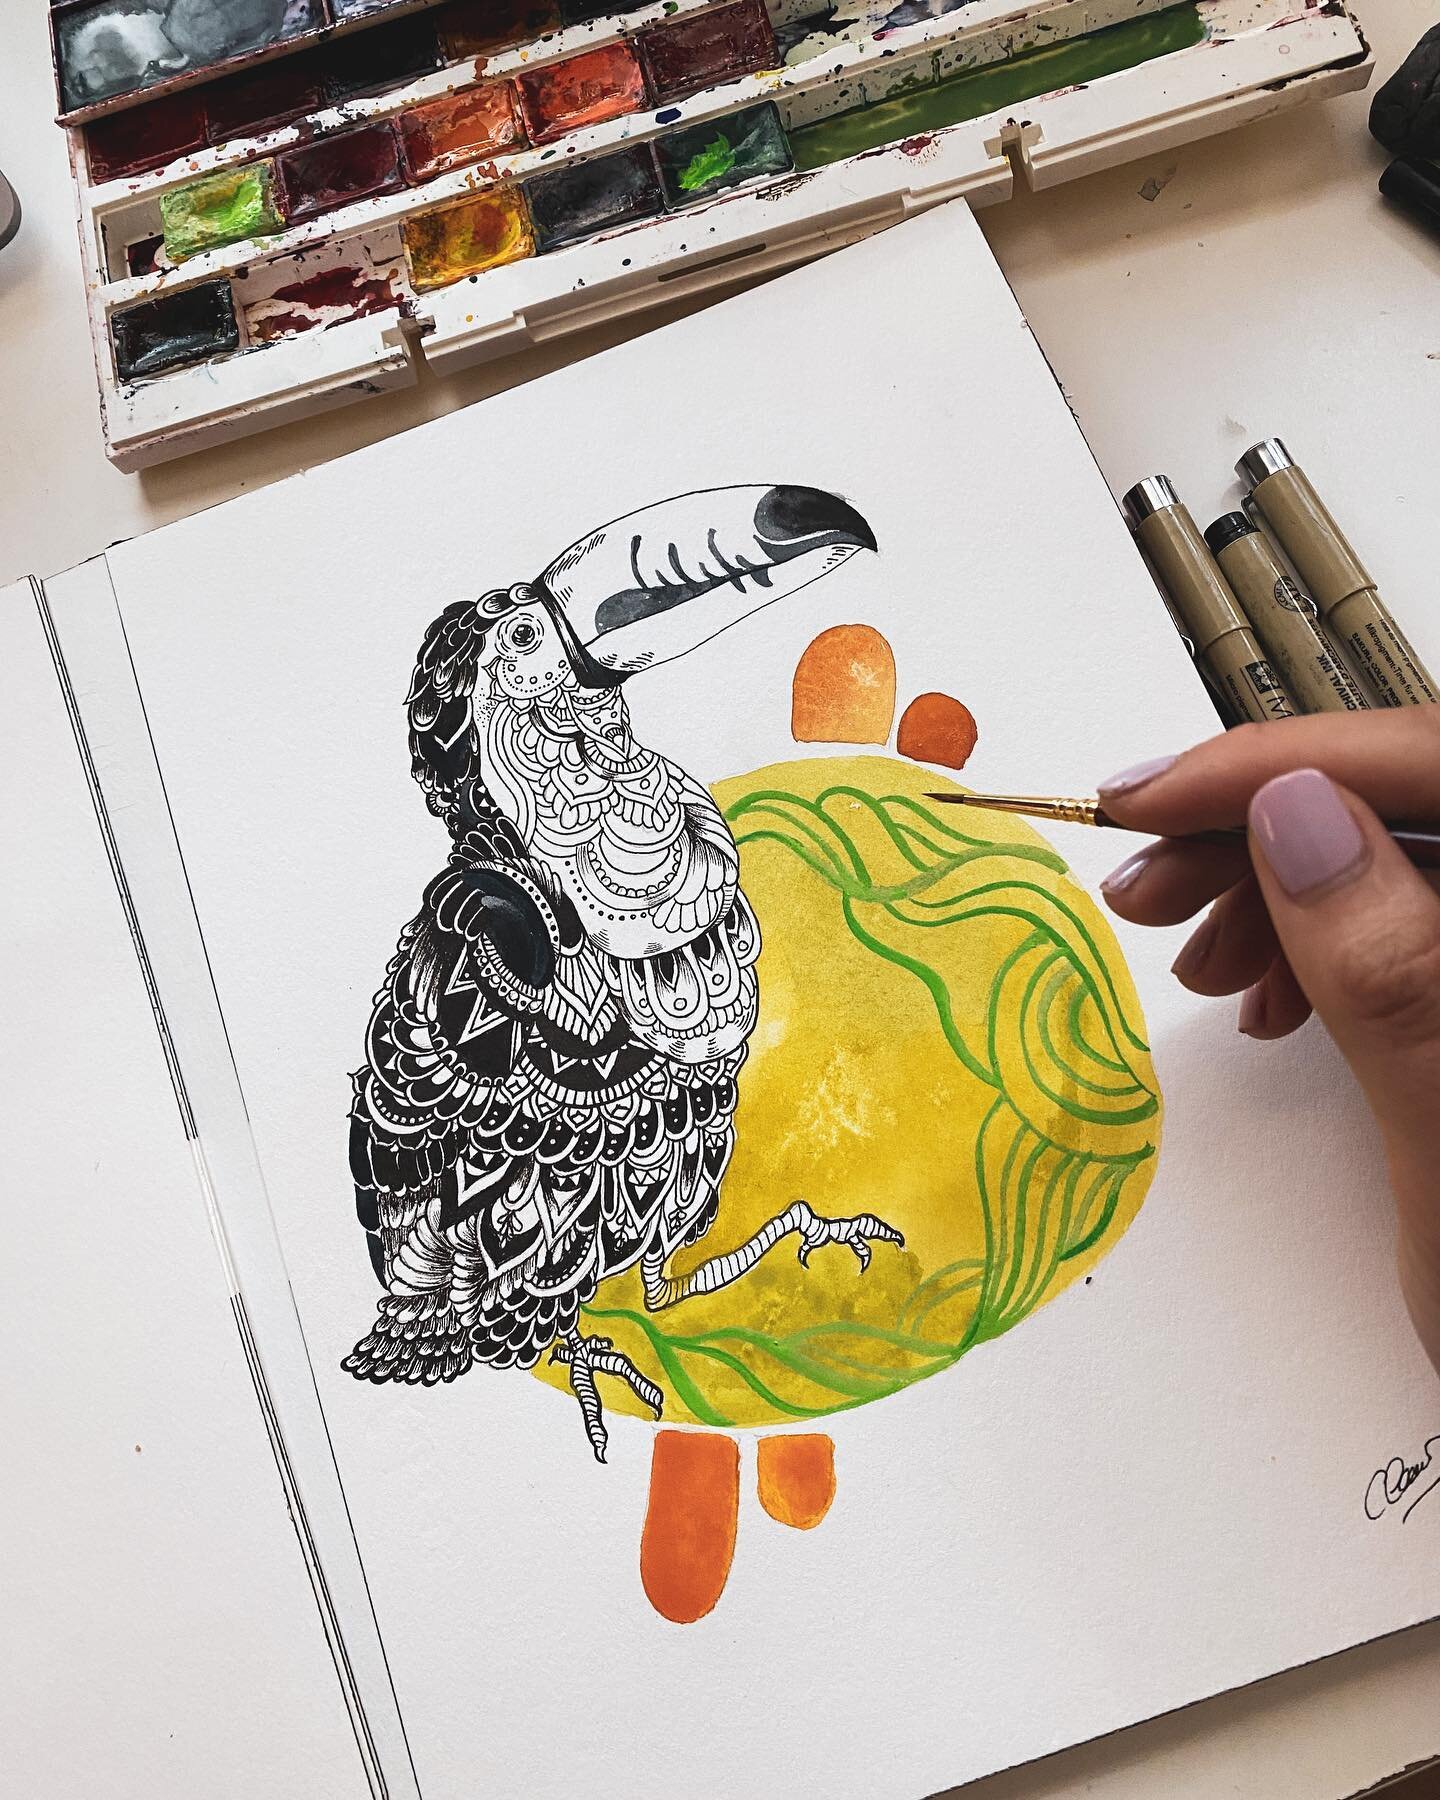 Being away for a holiday seems really fun until you start missing your work desk and watercolor 🥹
.
.
.
.
.
.
.
.
#toucan #watercolorpainting #toucanwatercolor #sakuraofamerica #sakurapen #inkdrawing #zentangleart